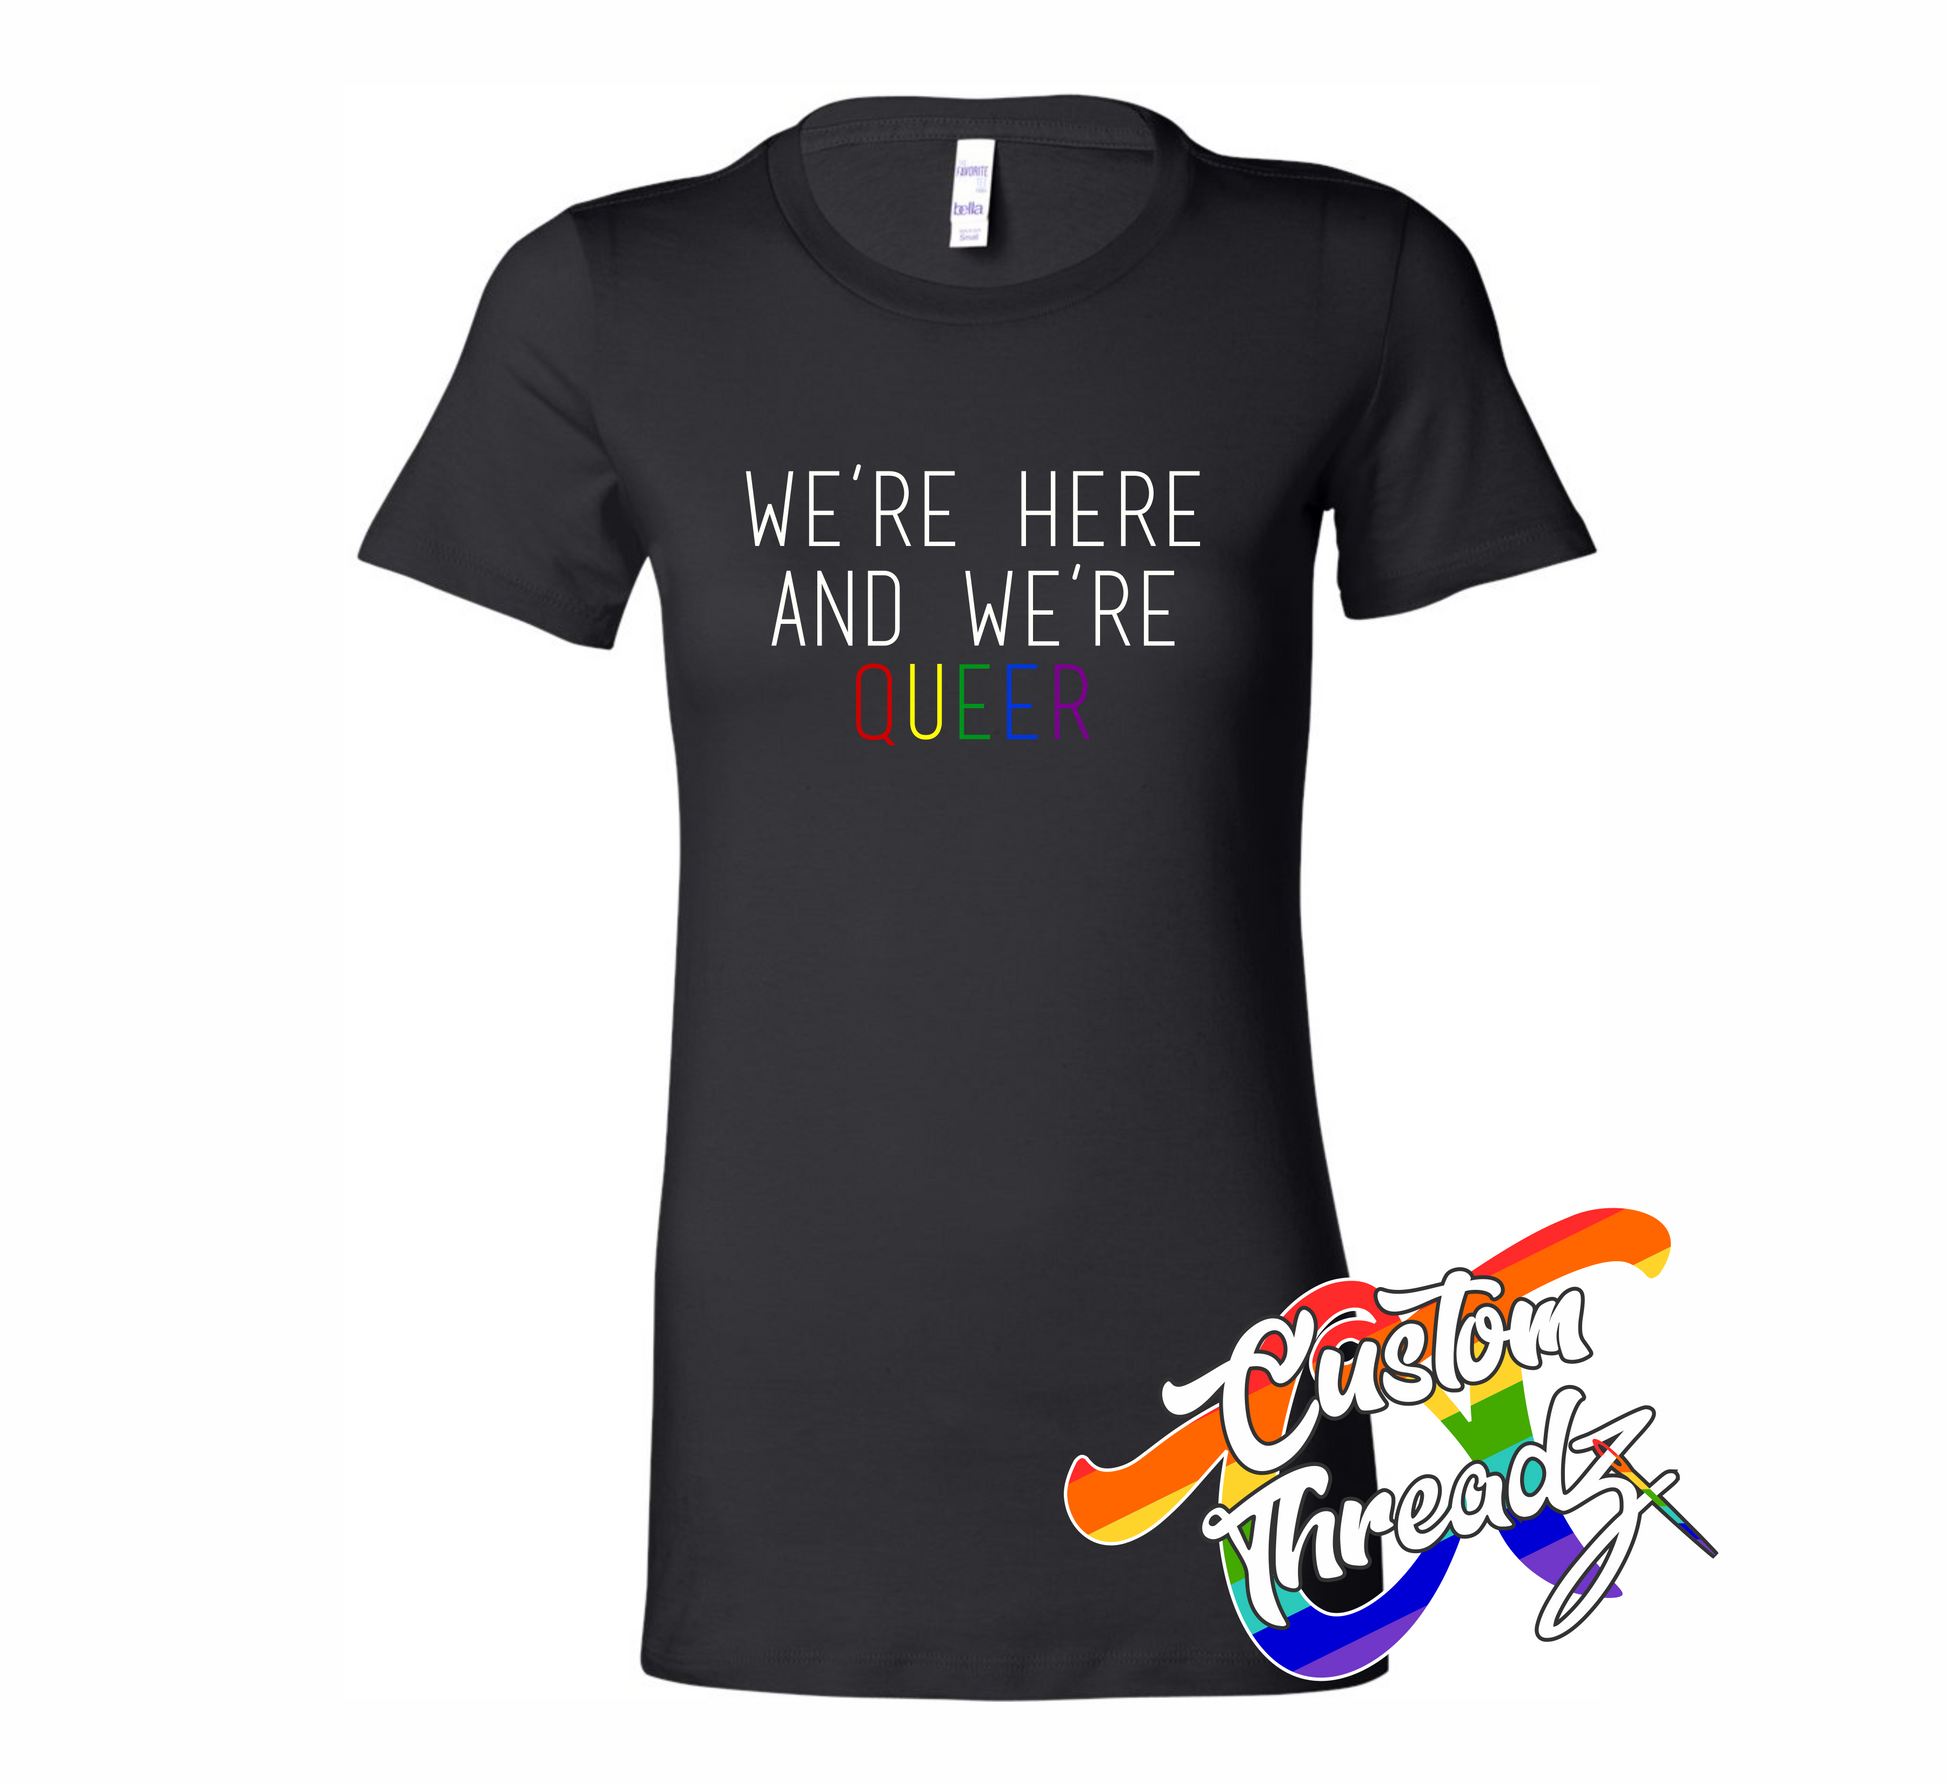 black womens tee with were here were queer rainbow DTG printed design